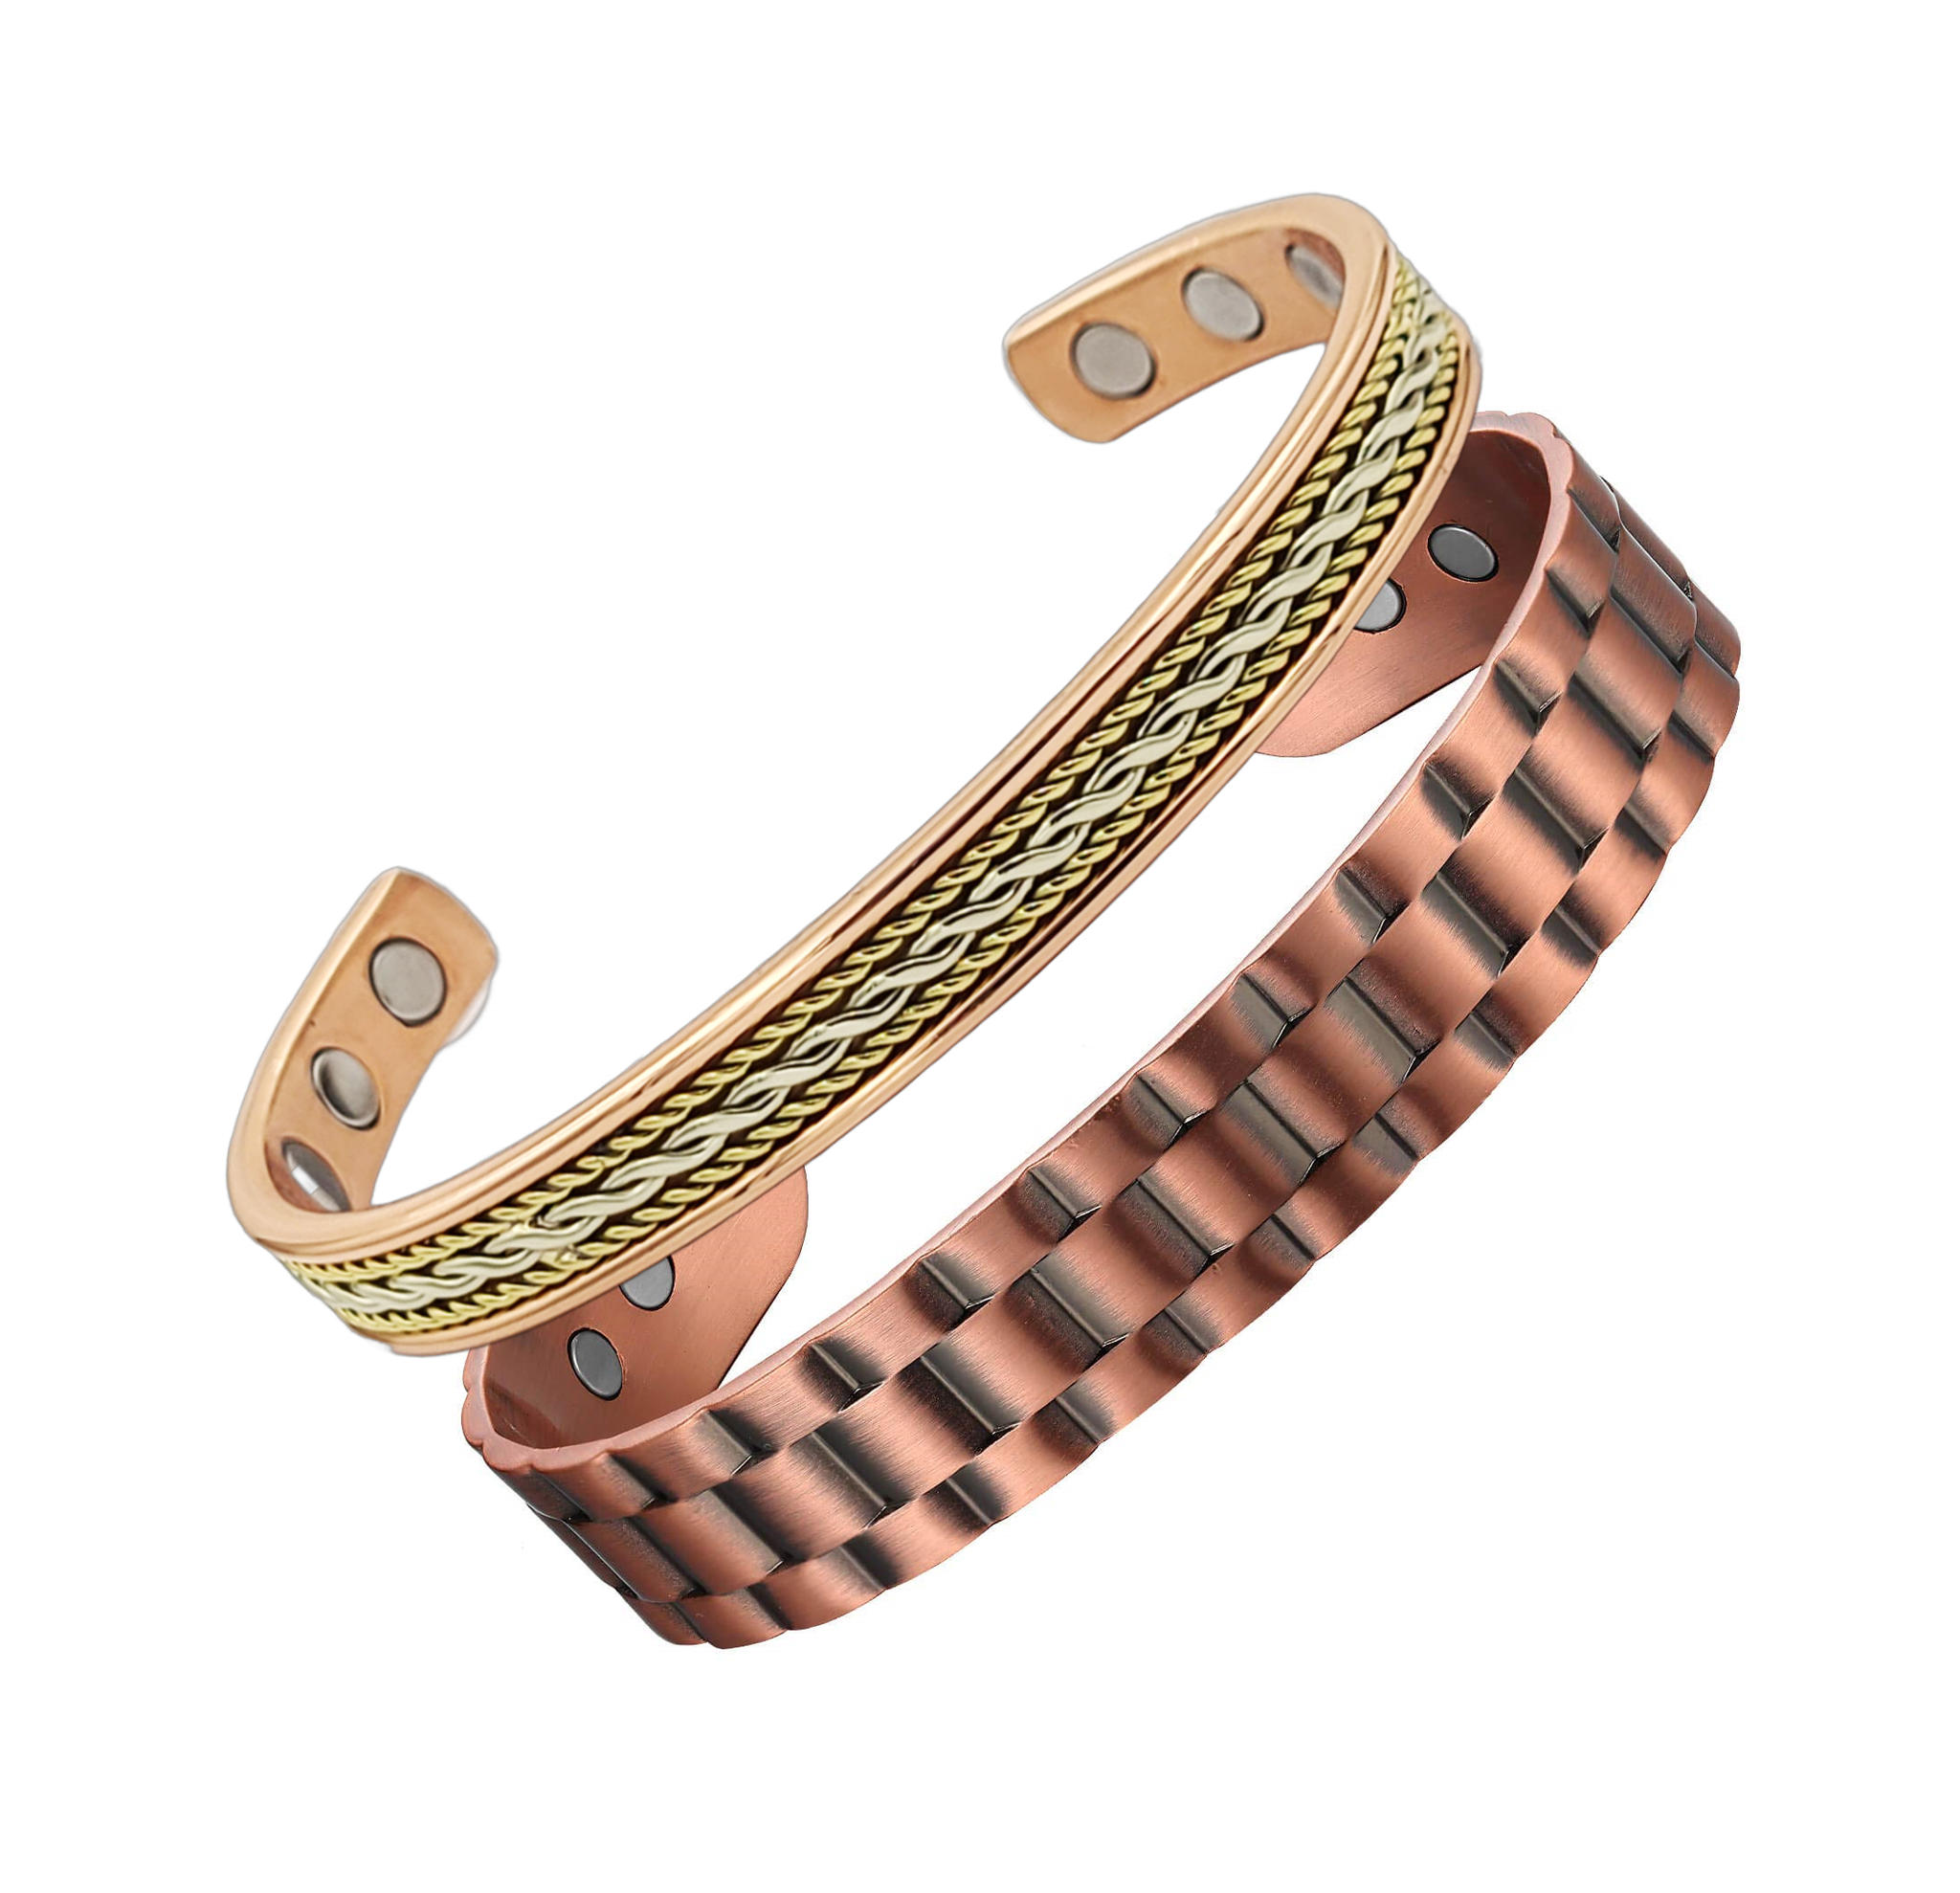 Pentacle Hand Crafted Copper Chakra Jewelry Cuff Wrist Bracelet For Women  And Men Gifts at Rs 140/piece | Peer Gali | Moradabad | ID: 2851356153330